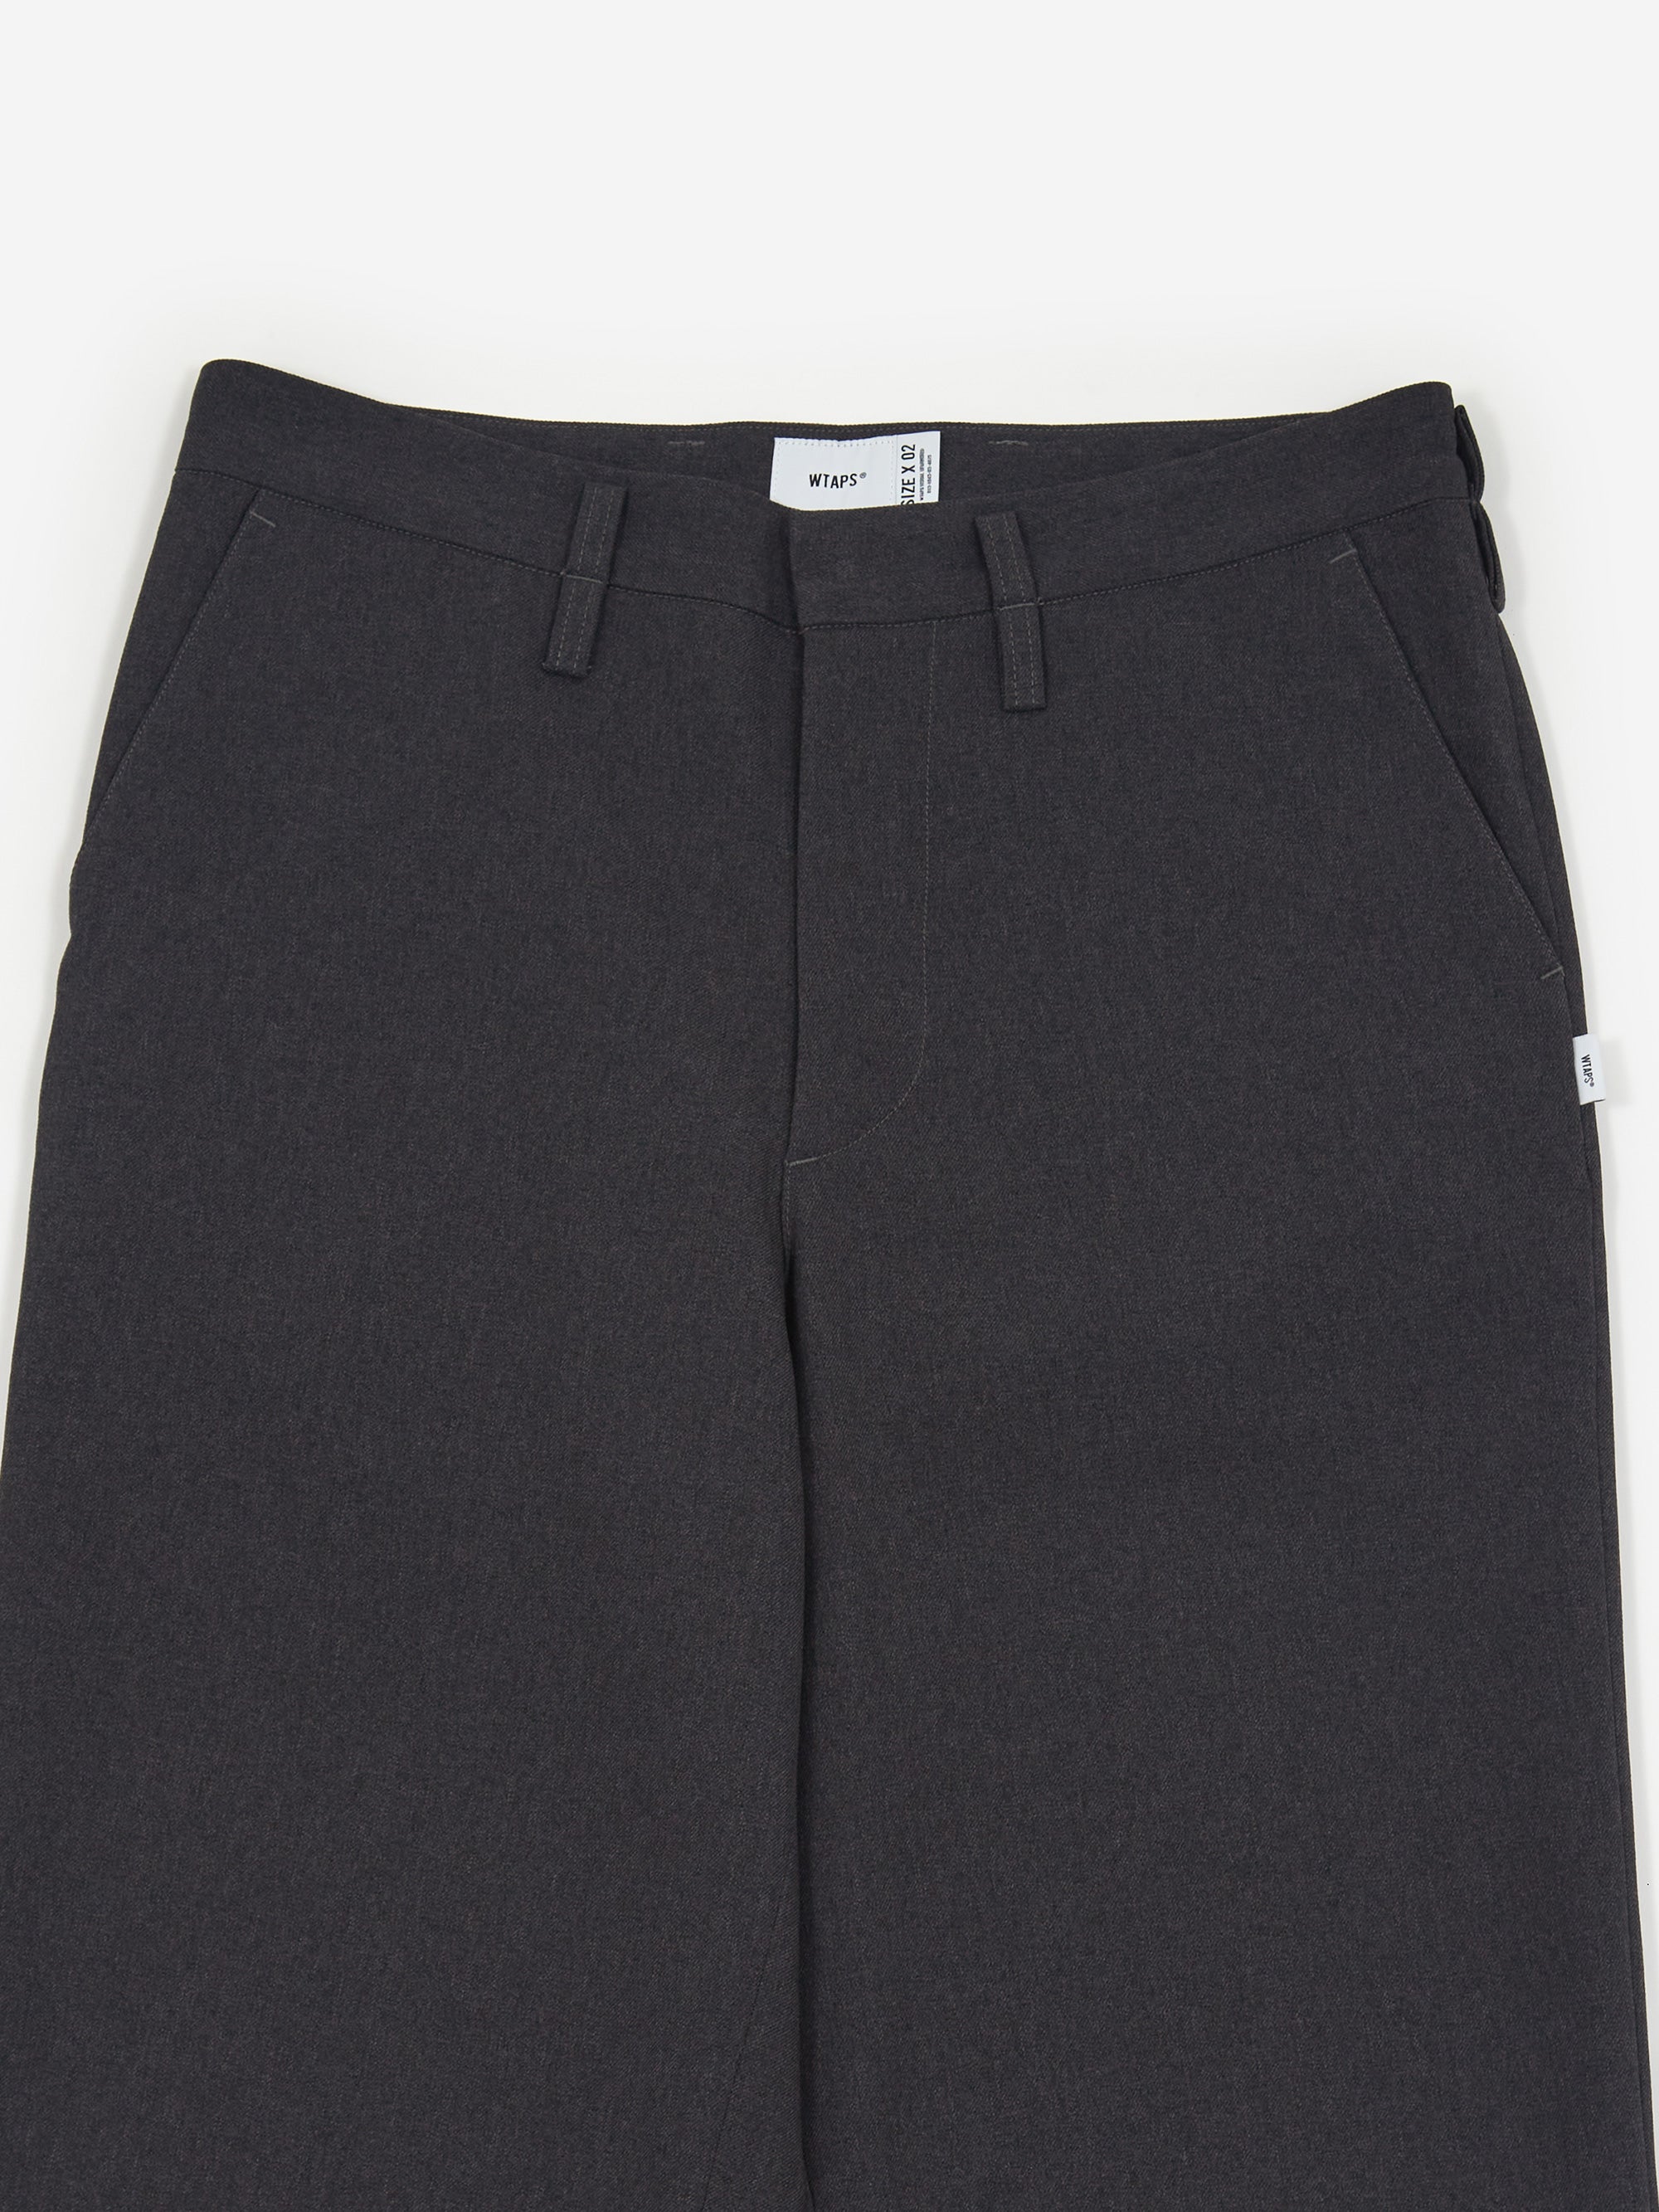 BEND / TROUSERS POLY. TWILL. SIGN WTAPS-